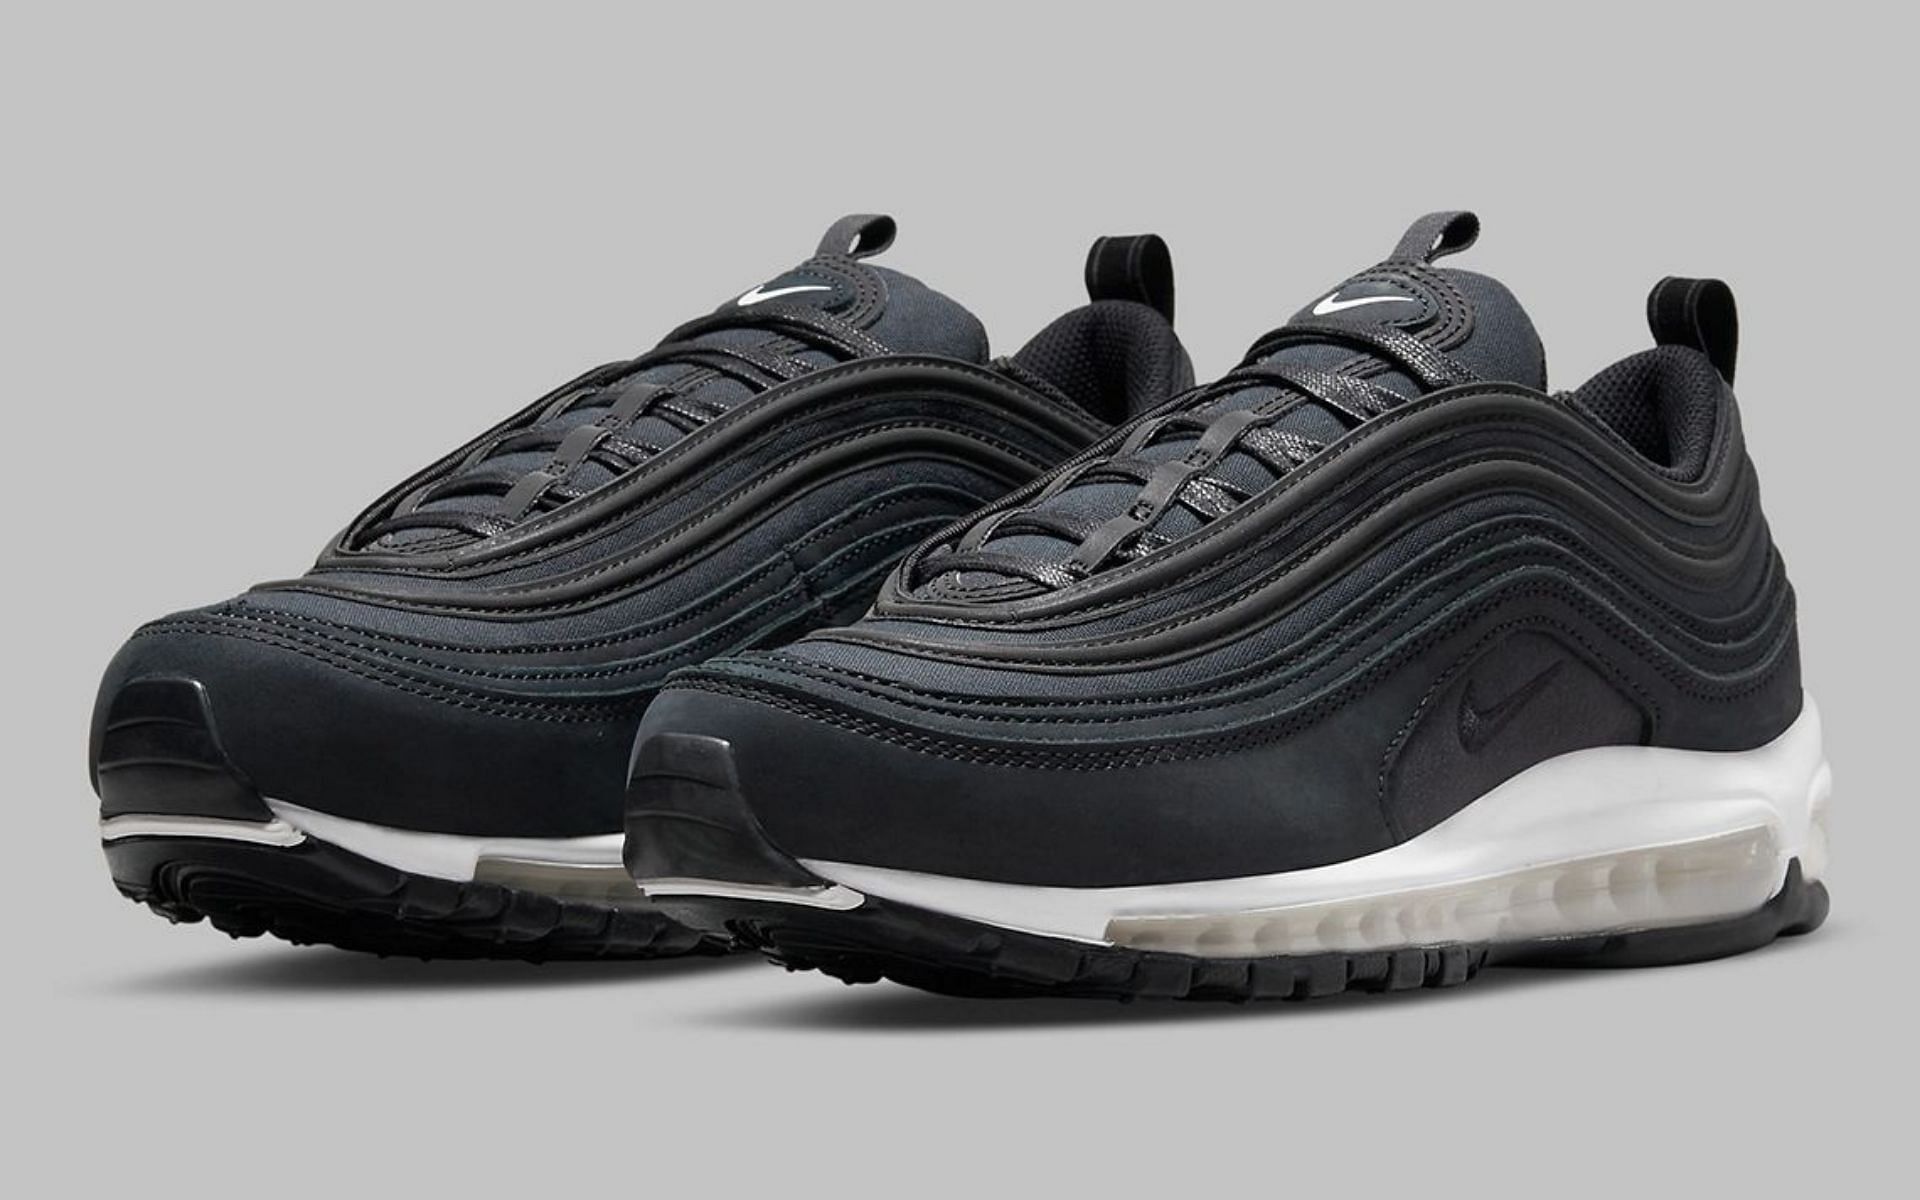 Nike Air Max 97 Special Edition (Image via Sneakernews)